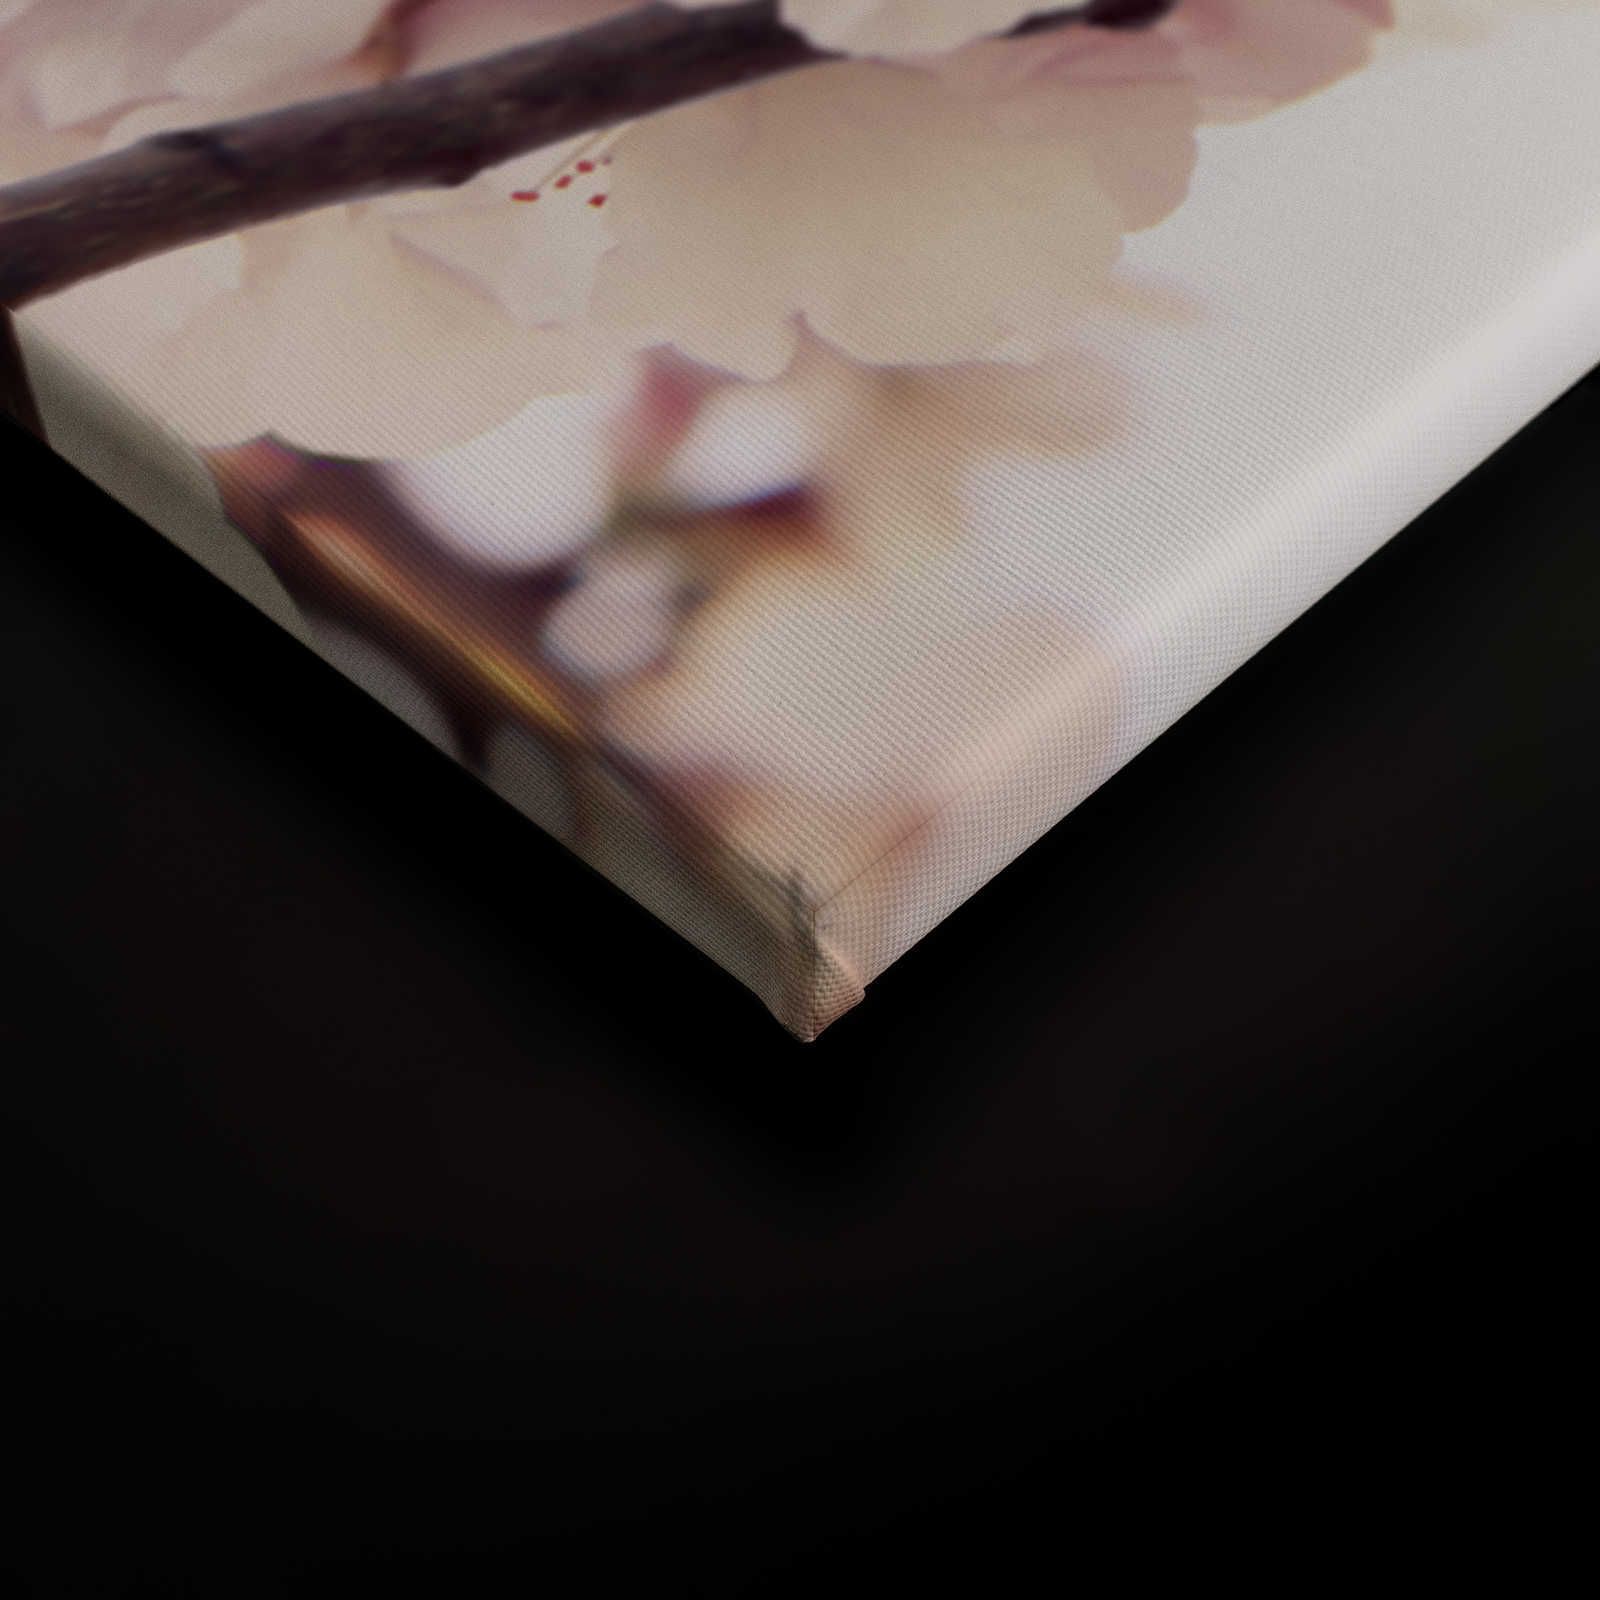             Nature Canvas Painting with Cherry Blossoms - 0.90 m x 0.60 m
        